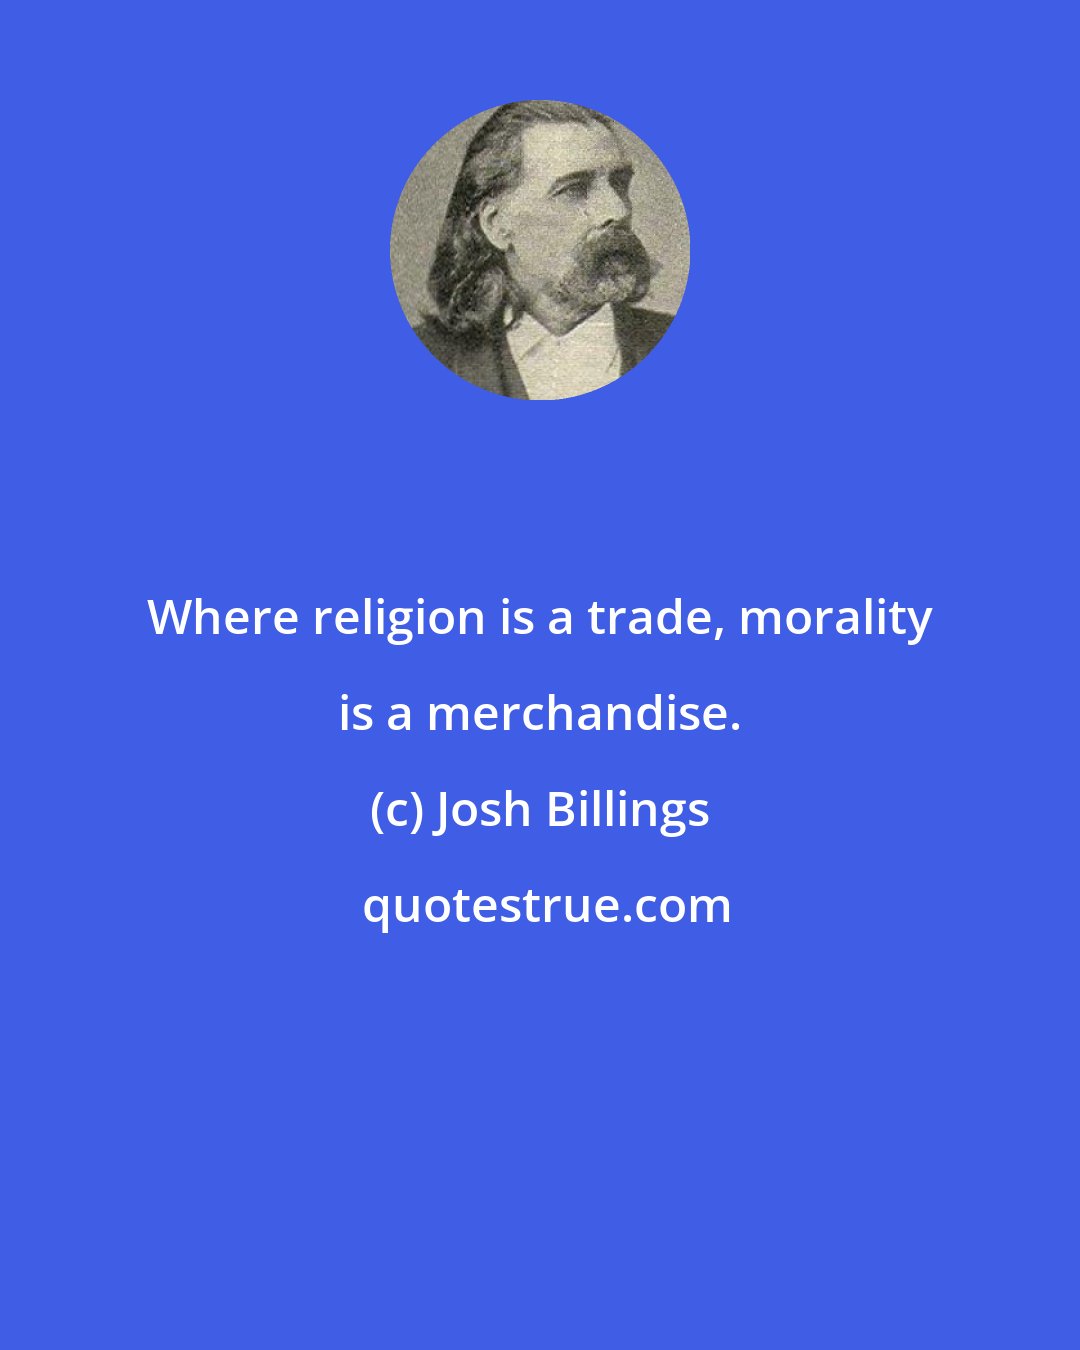 Josh Billings: Where religion is a trade, morality is a merchandise.